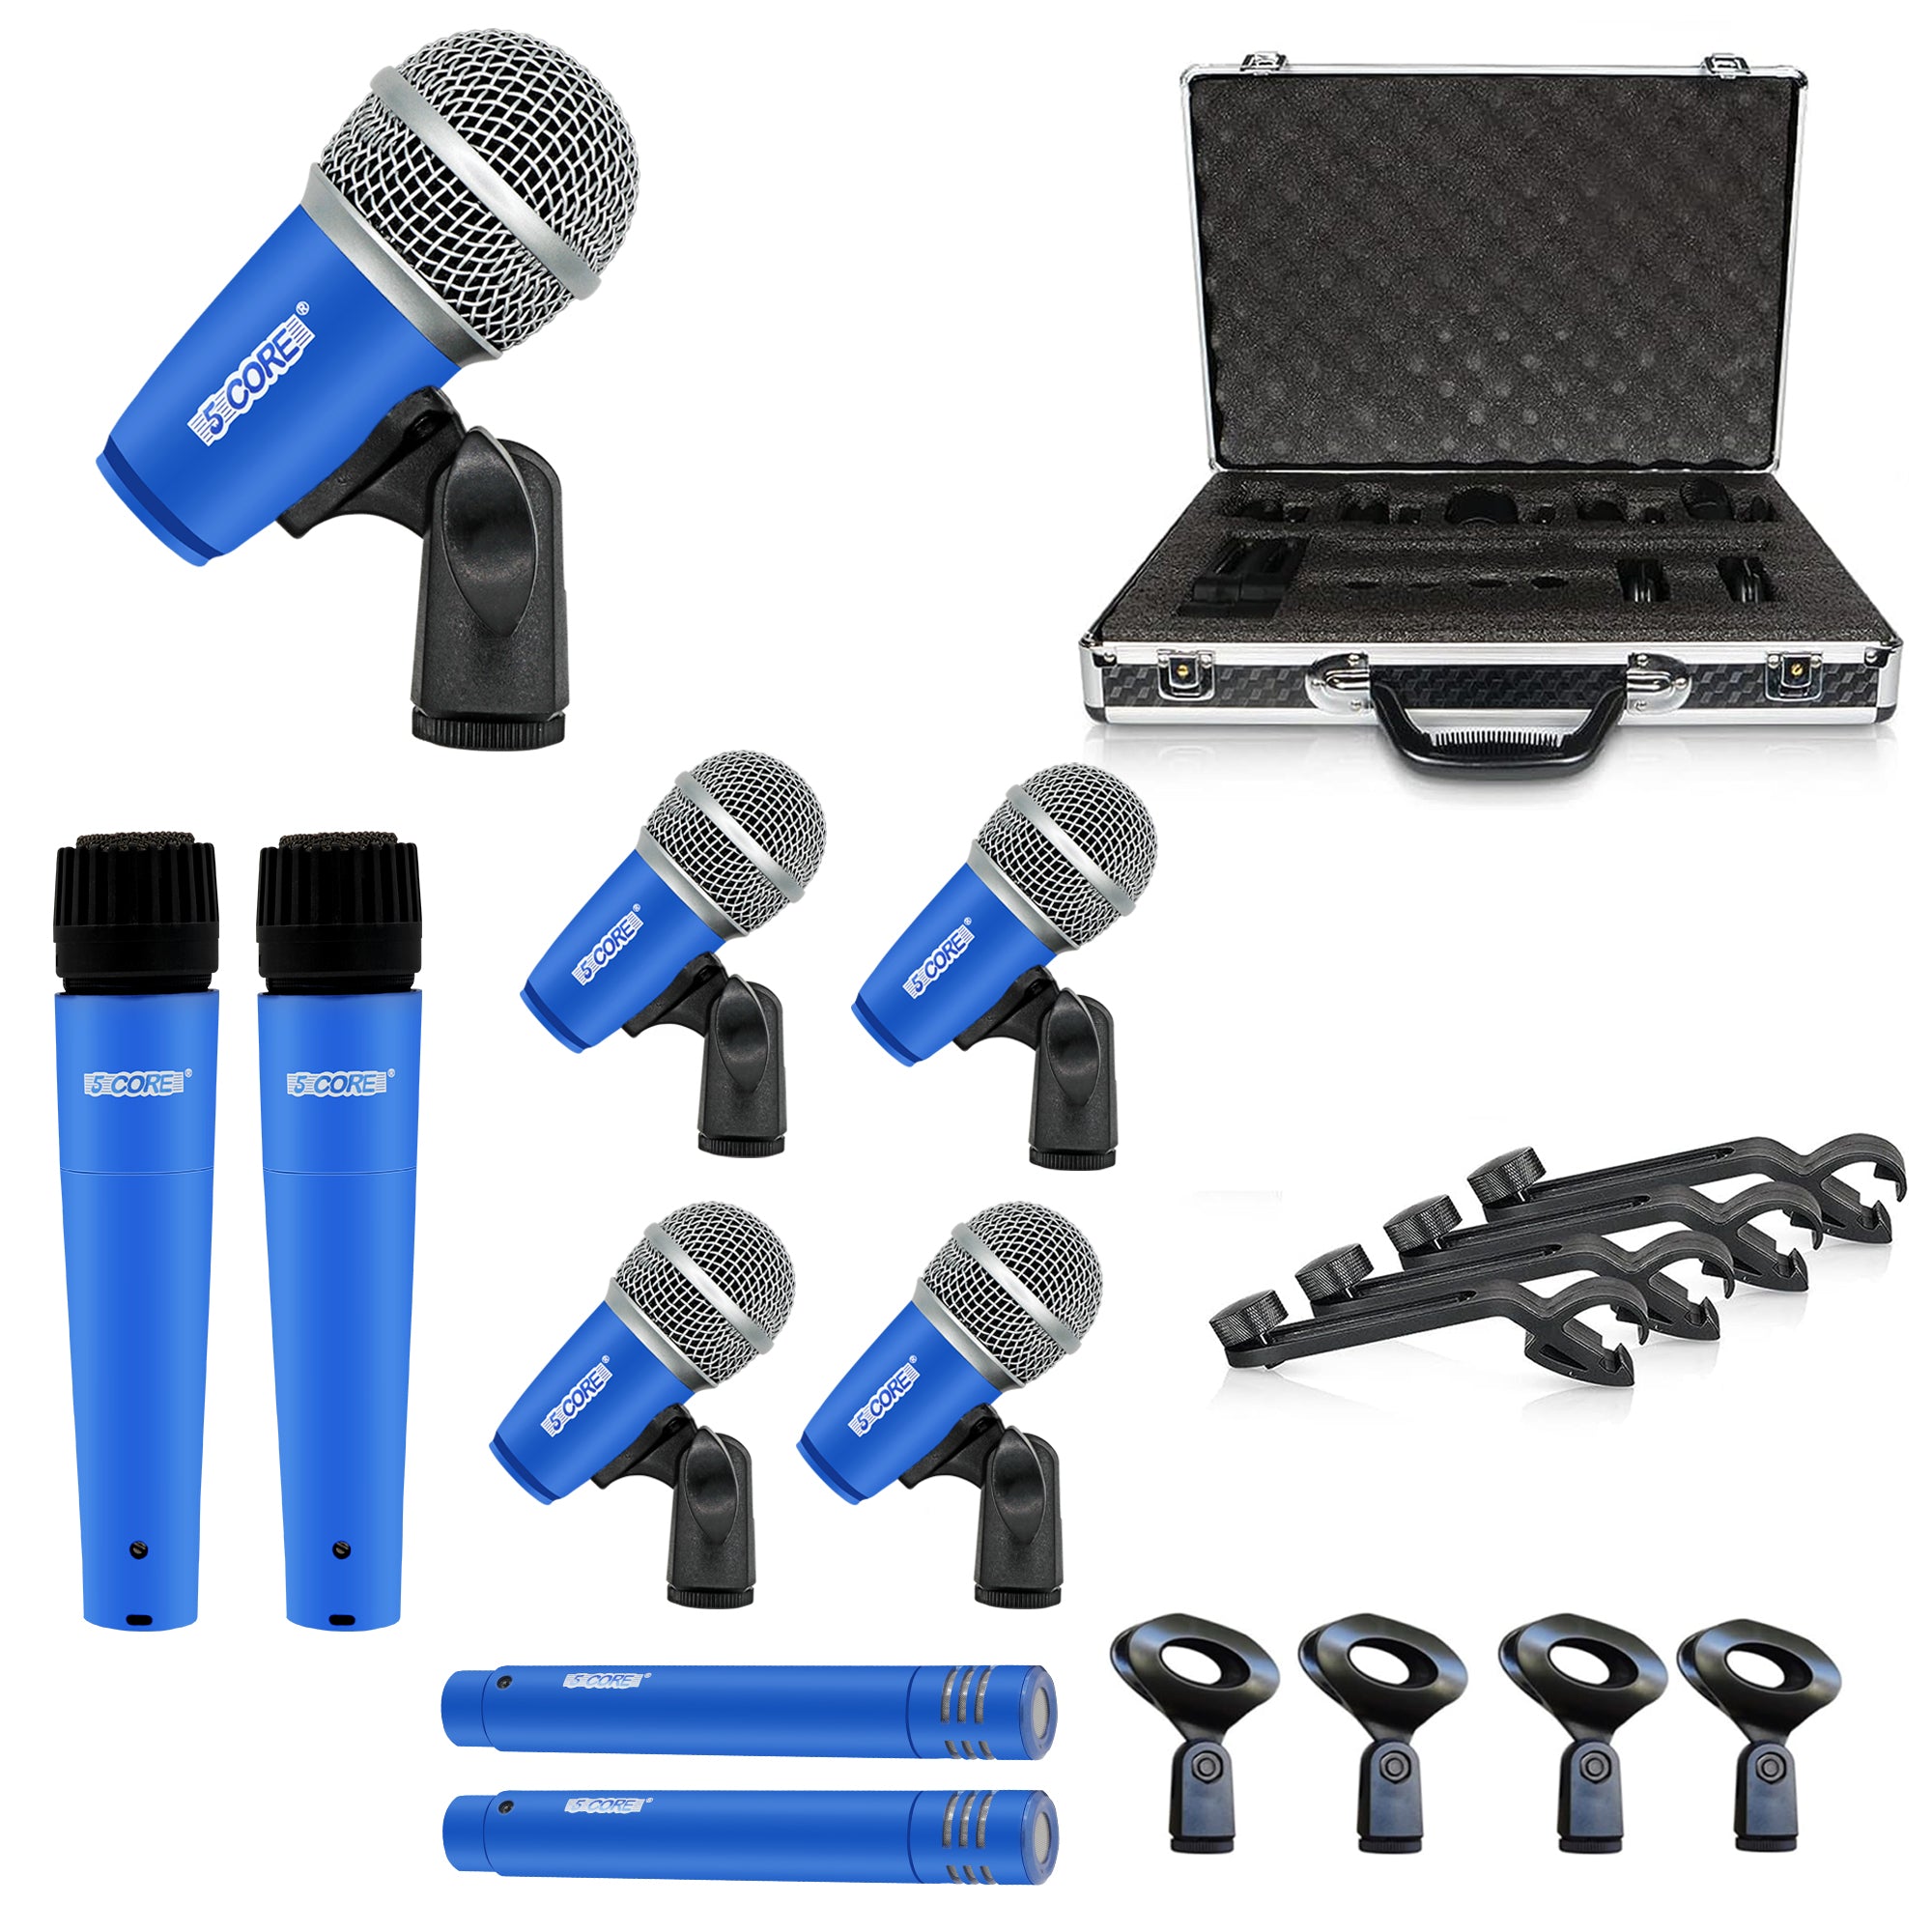 Nine-piece dynamic XLR microphone set tailored for drummers, covering every drum element.